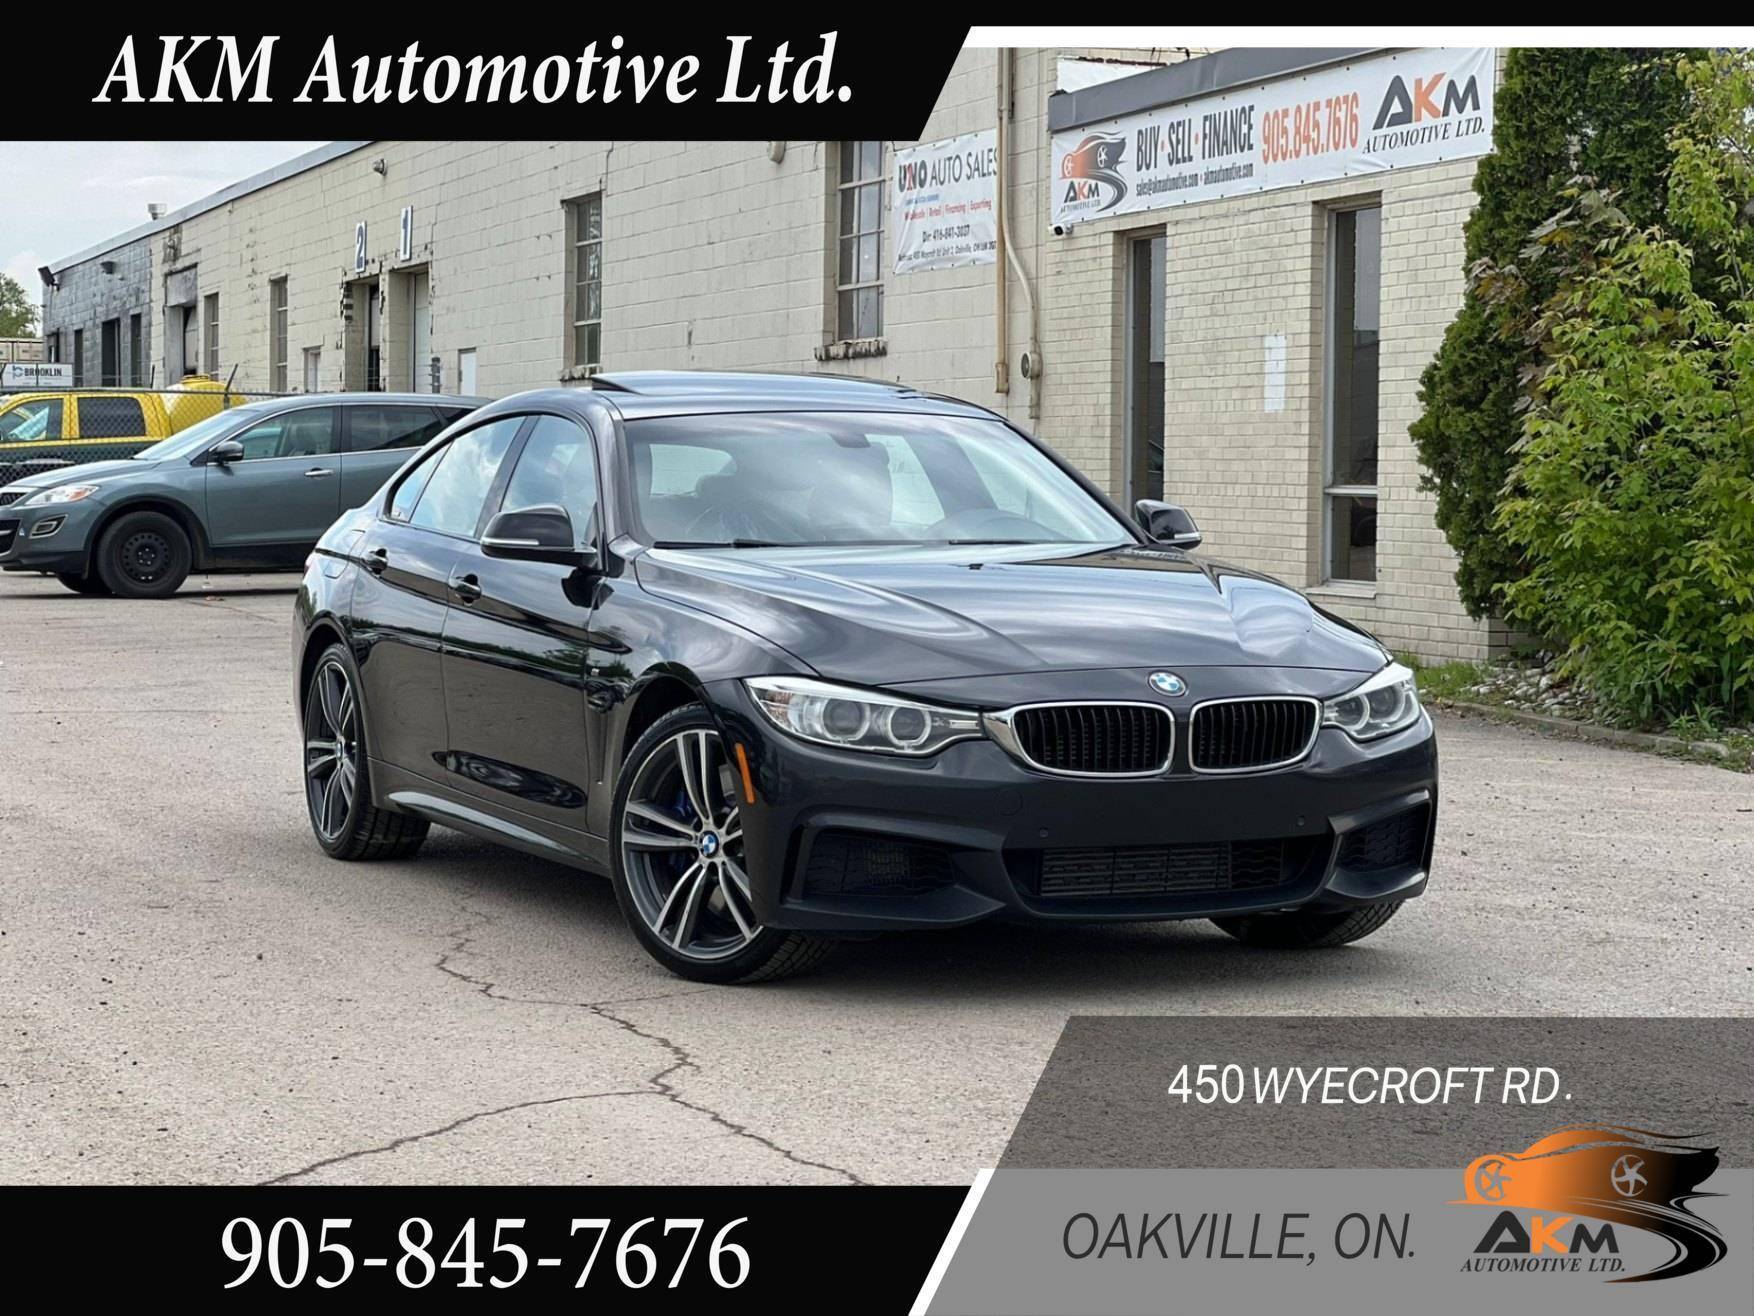 2016 BMW 4 Series 4dr Sdn 435i xDrive AWD Gran Coupe, Certified